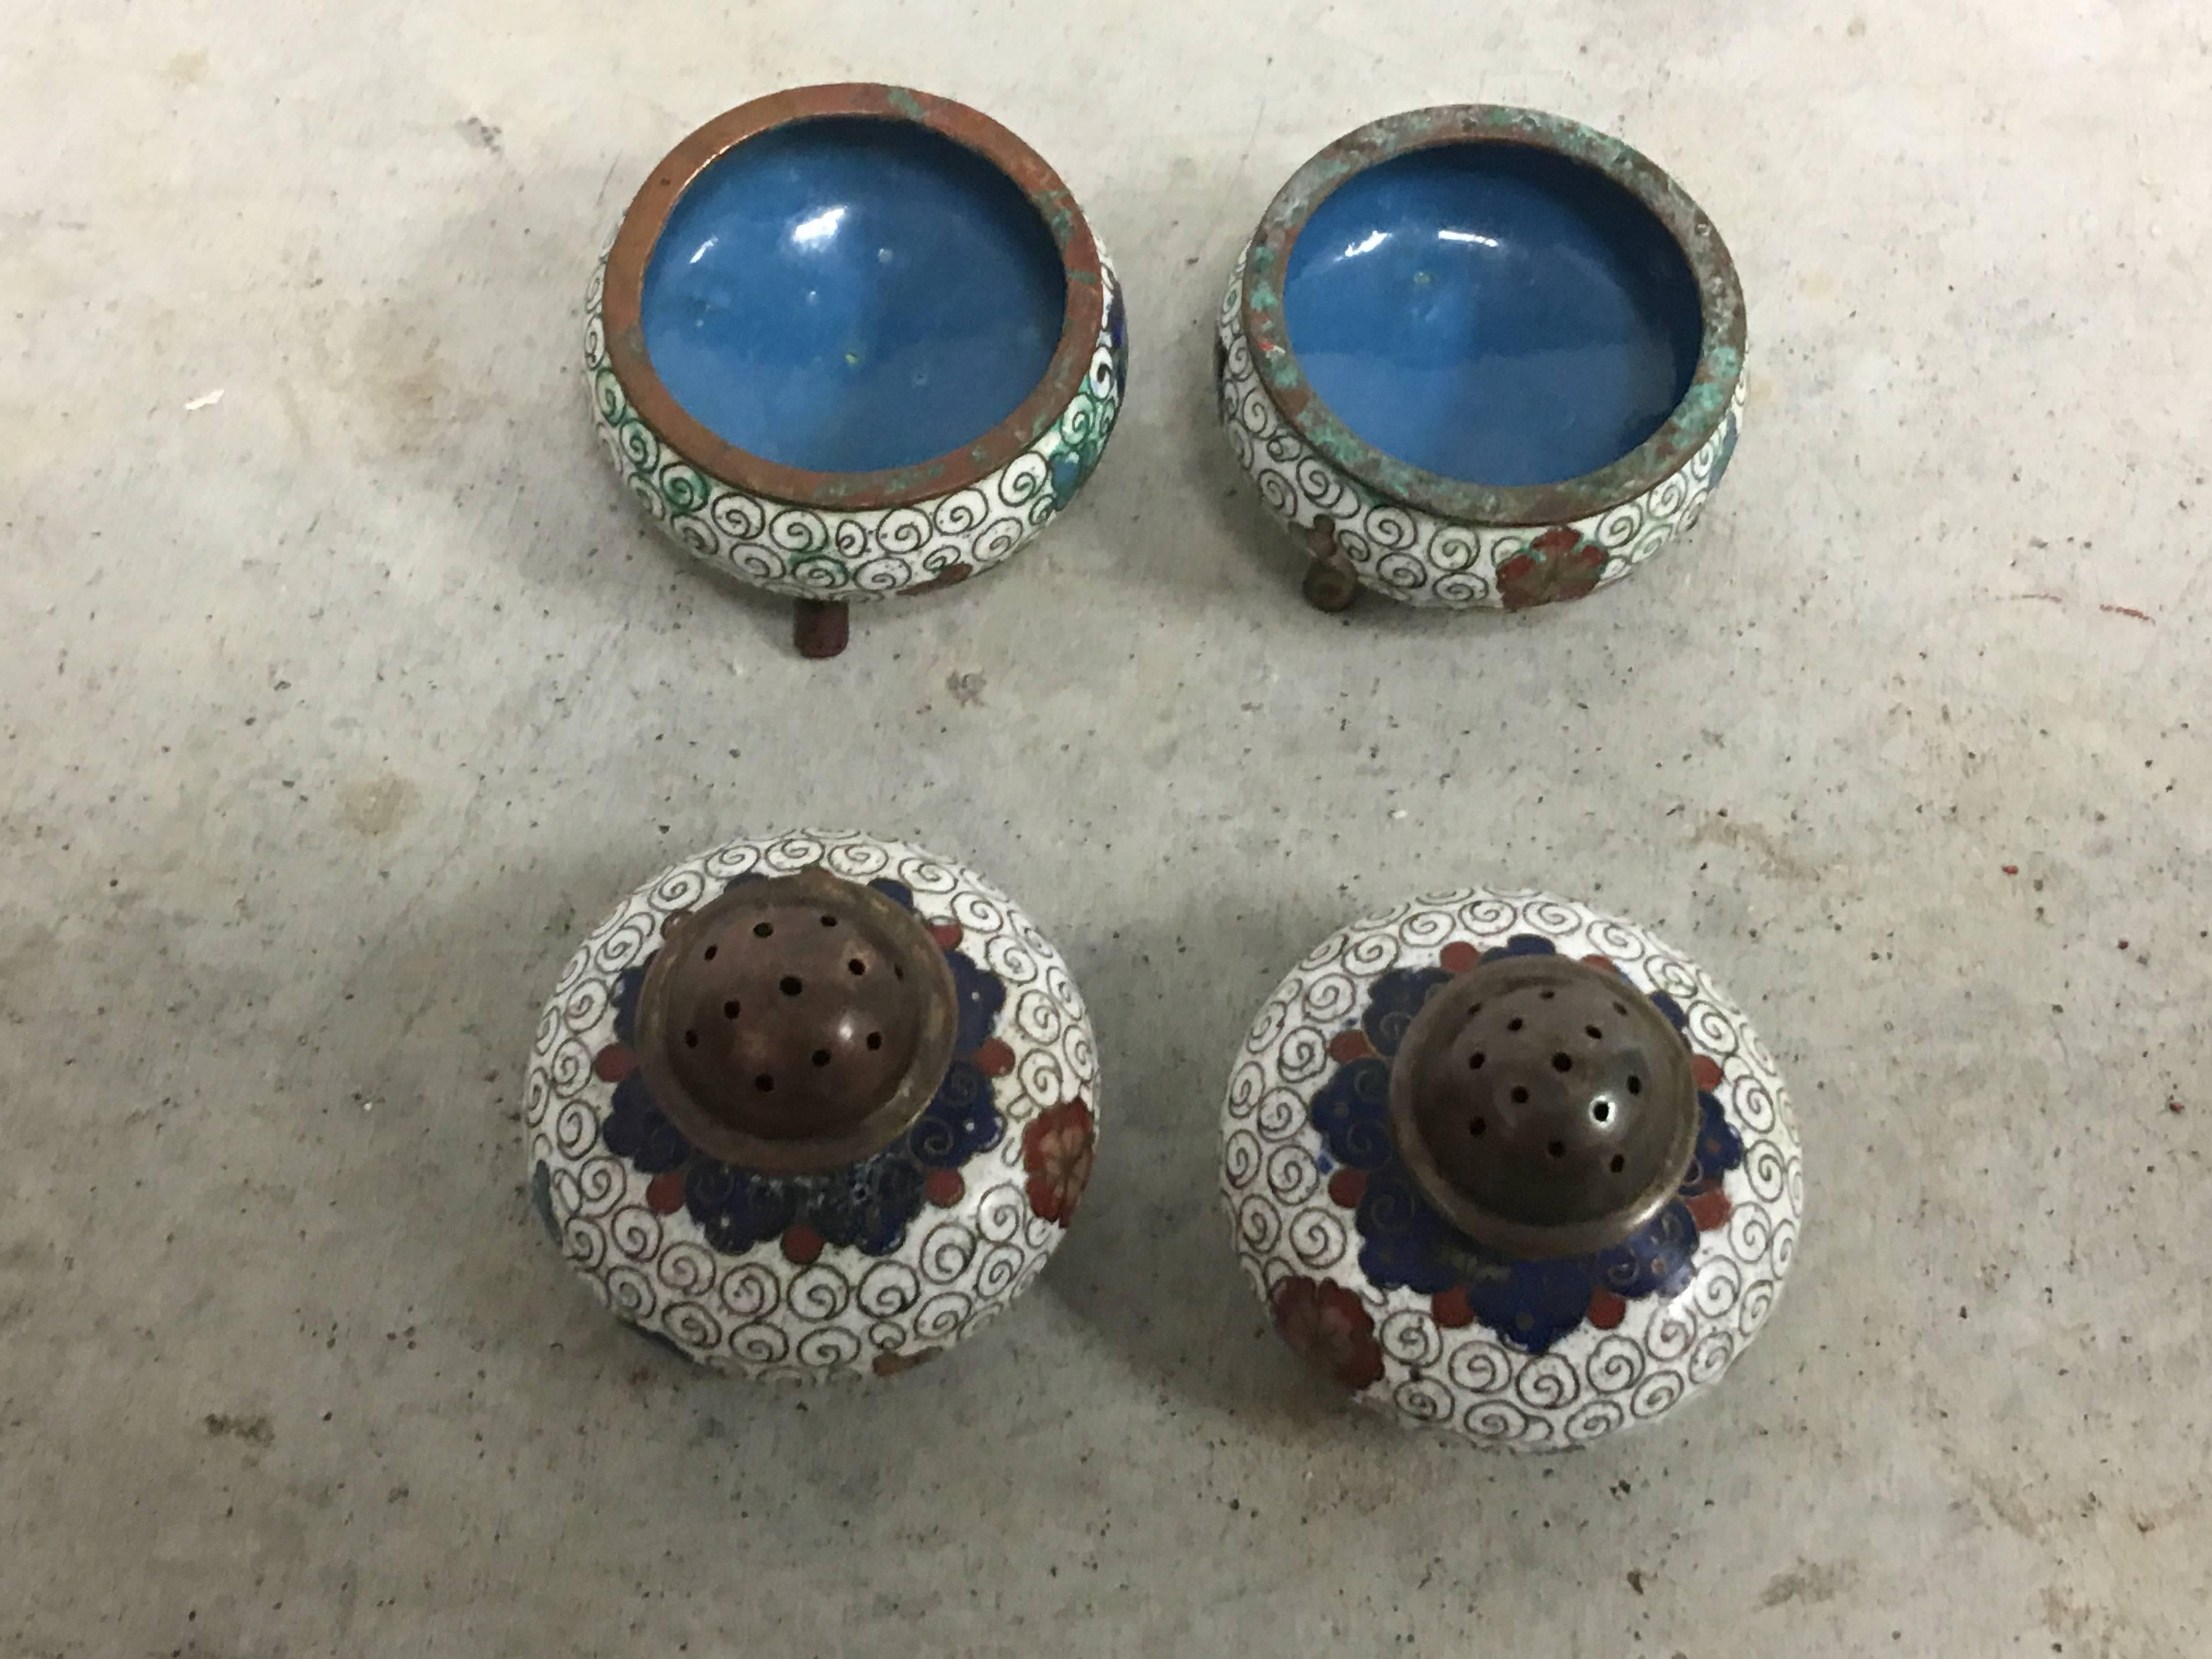 Cloissoné 1930s Cloisonné Salt and Pepper Shakers with Stands